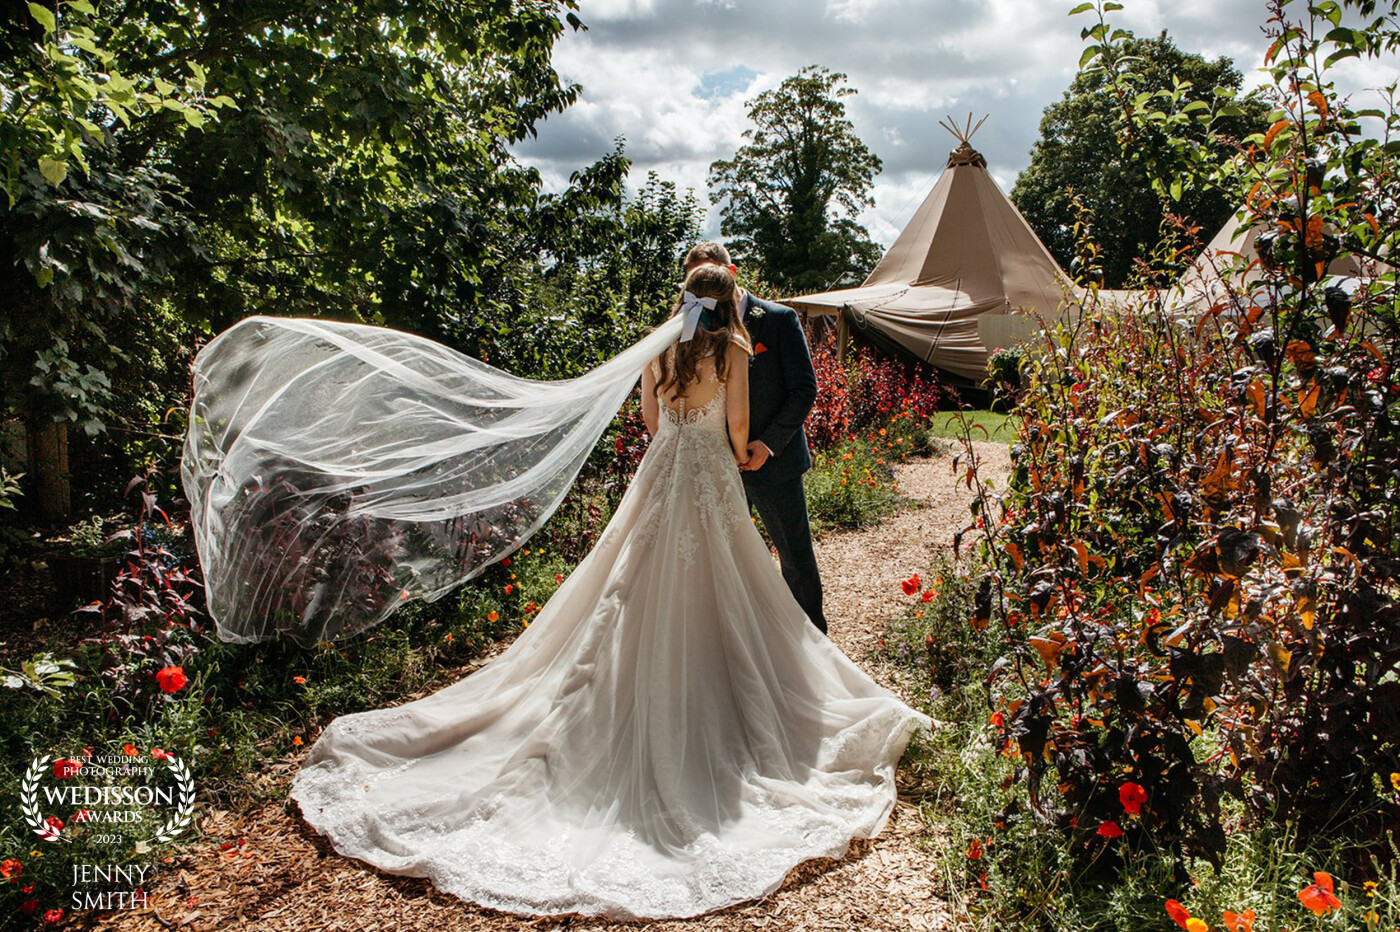 Jessica and Raff got married at the Wroxeter hotel in Shropshire. I was really looking forward to their wedding as I’d photographed Jessica’s sisters wedding a couple of years ago and the family are just so lovely! This is one of my favourite pics from the day - a lovely moment in the wildflower gardens complete with dramatic flowing veil and their wedding tipi in the background.